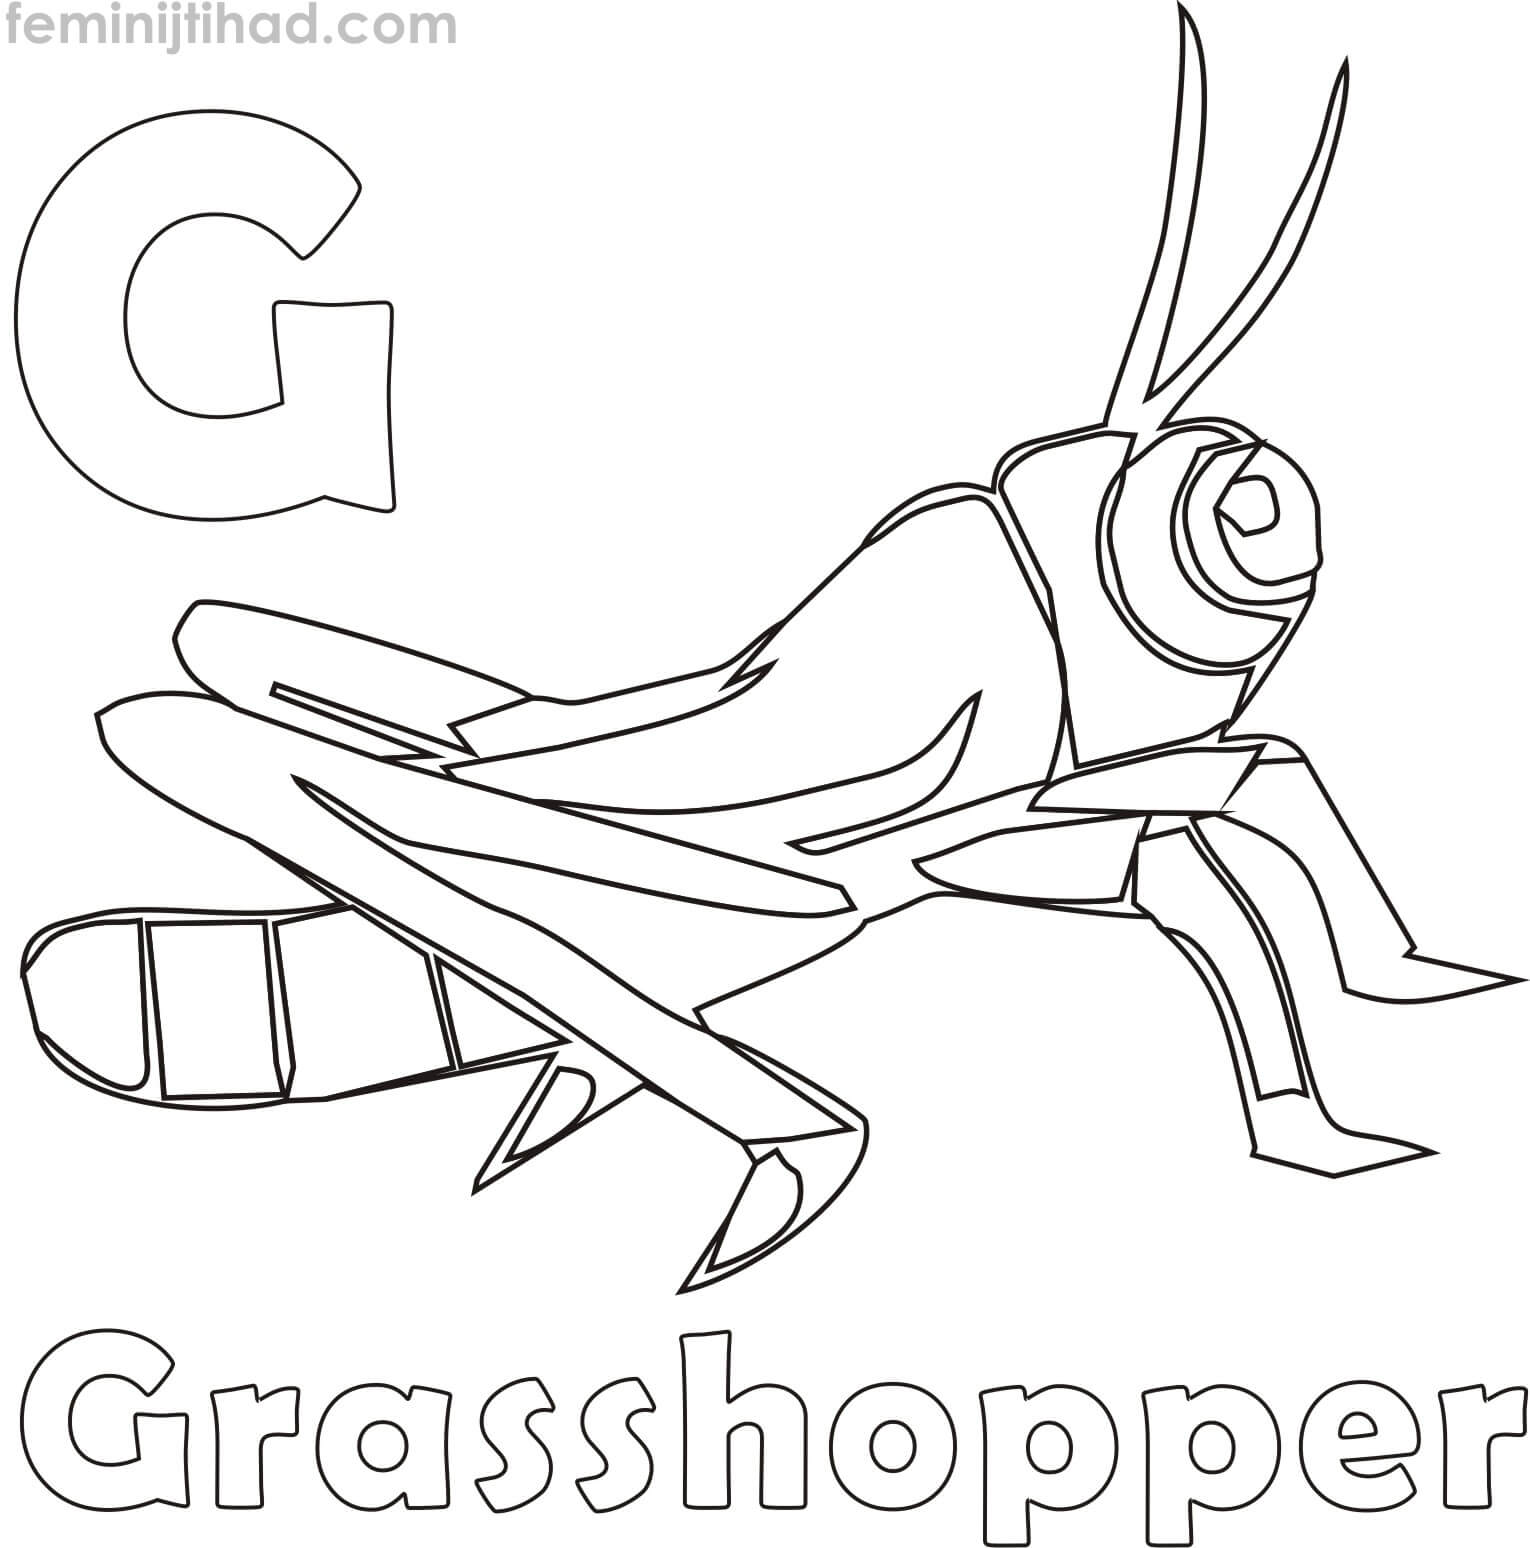 grasshopper colouring in page